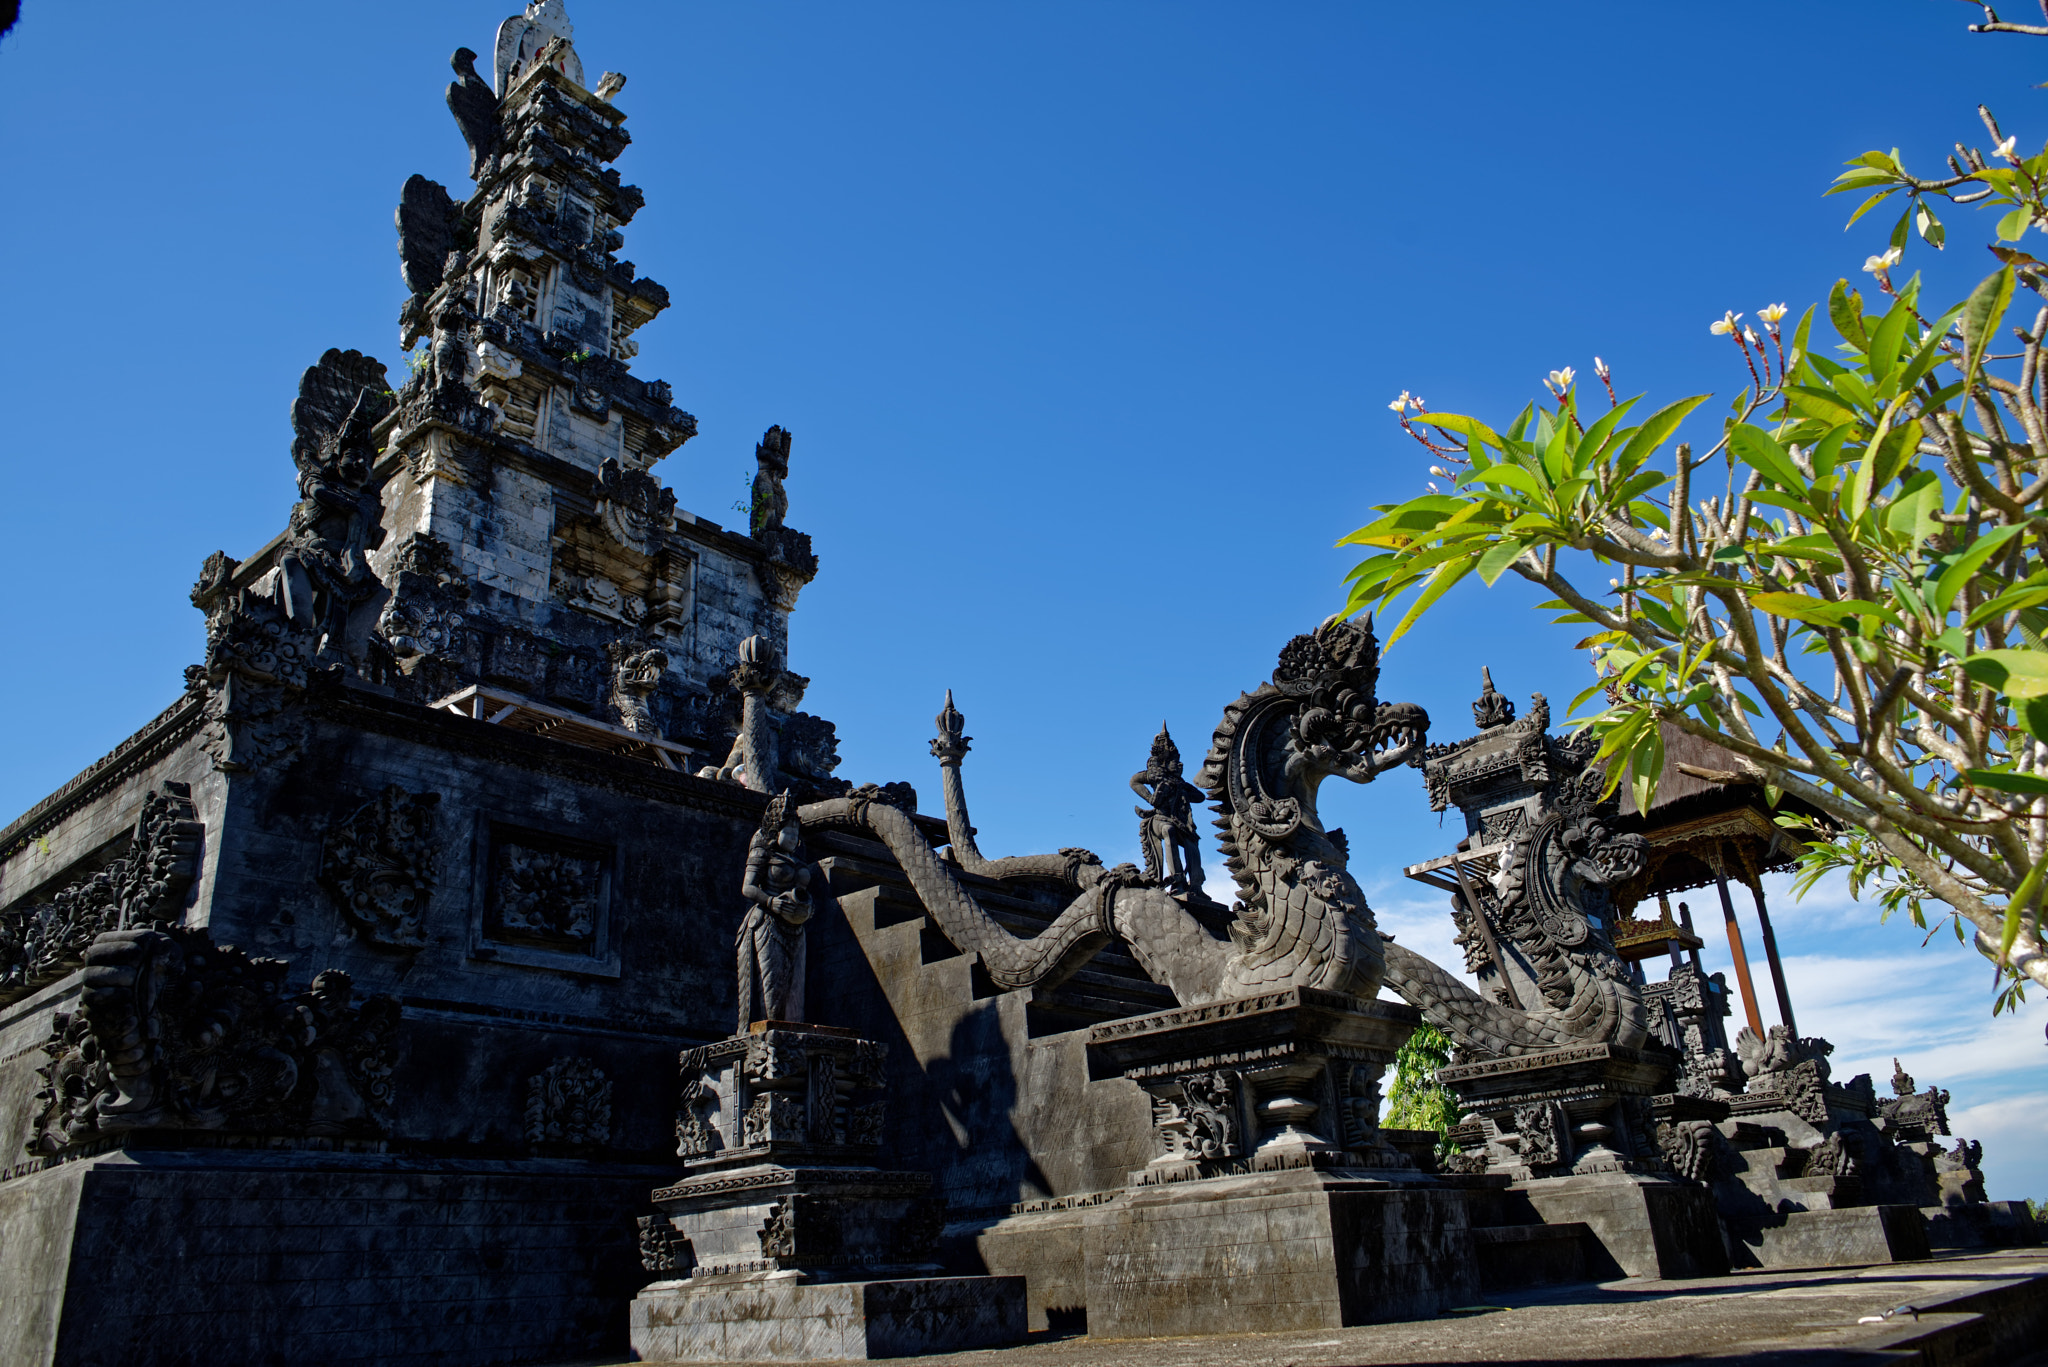 ZEISS Distagon T* 25mm F2.8 sample photo. Balinese temple photography